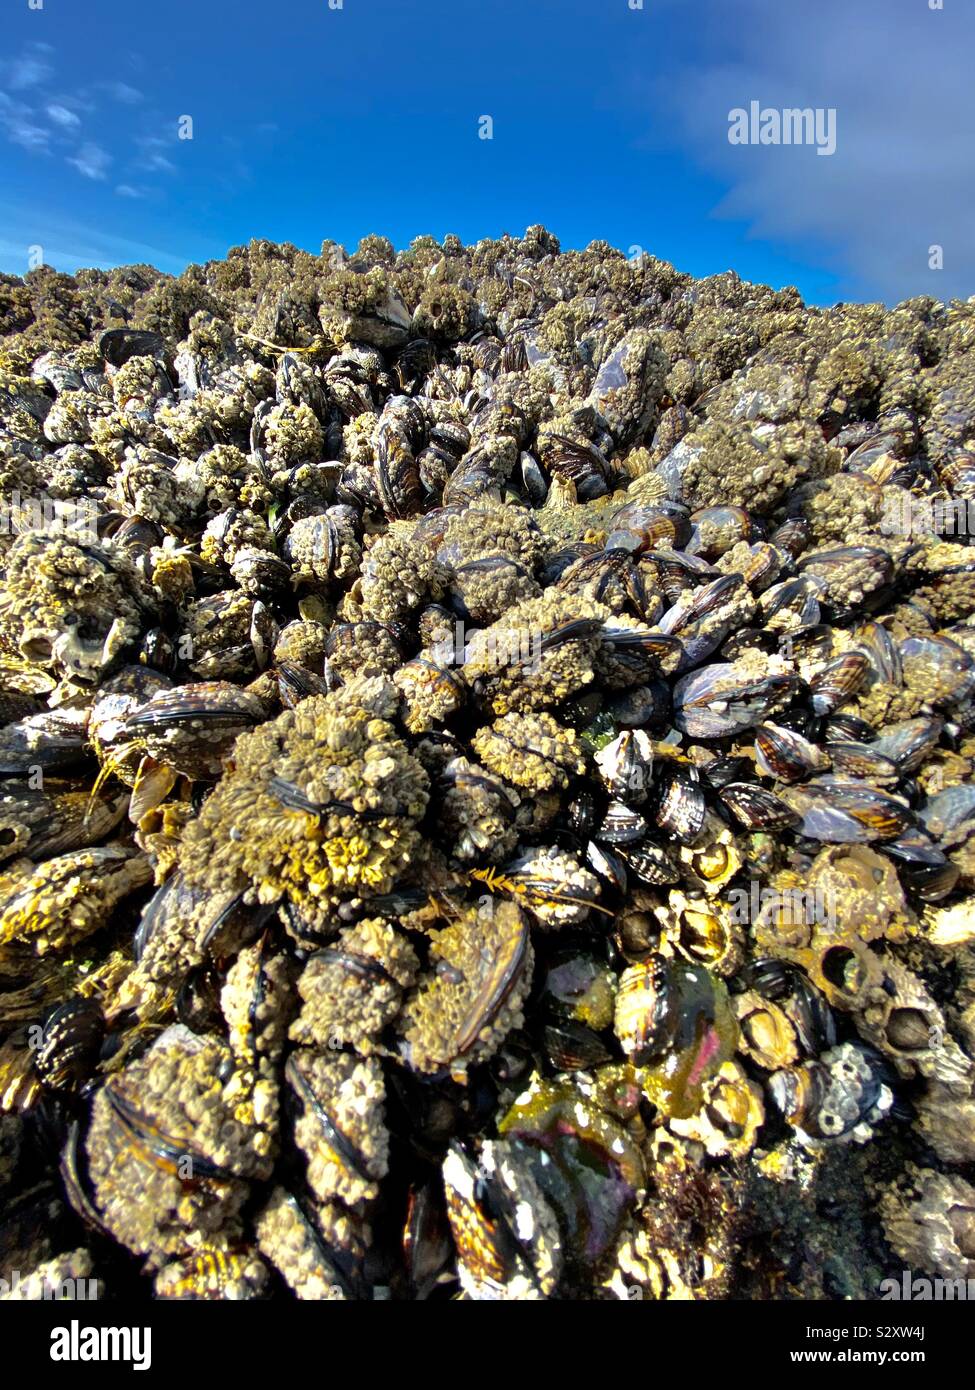 Mountain of live mussels exposed during low tide. Olympic National Park, Washington State Stock Photo